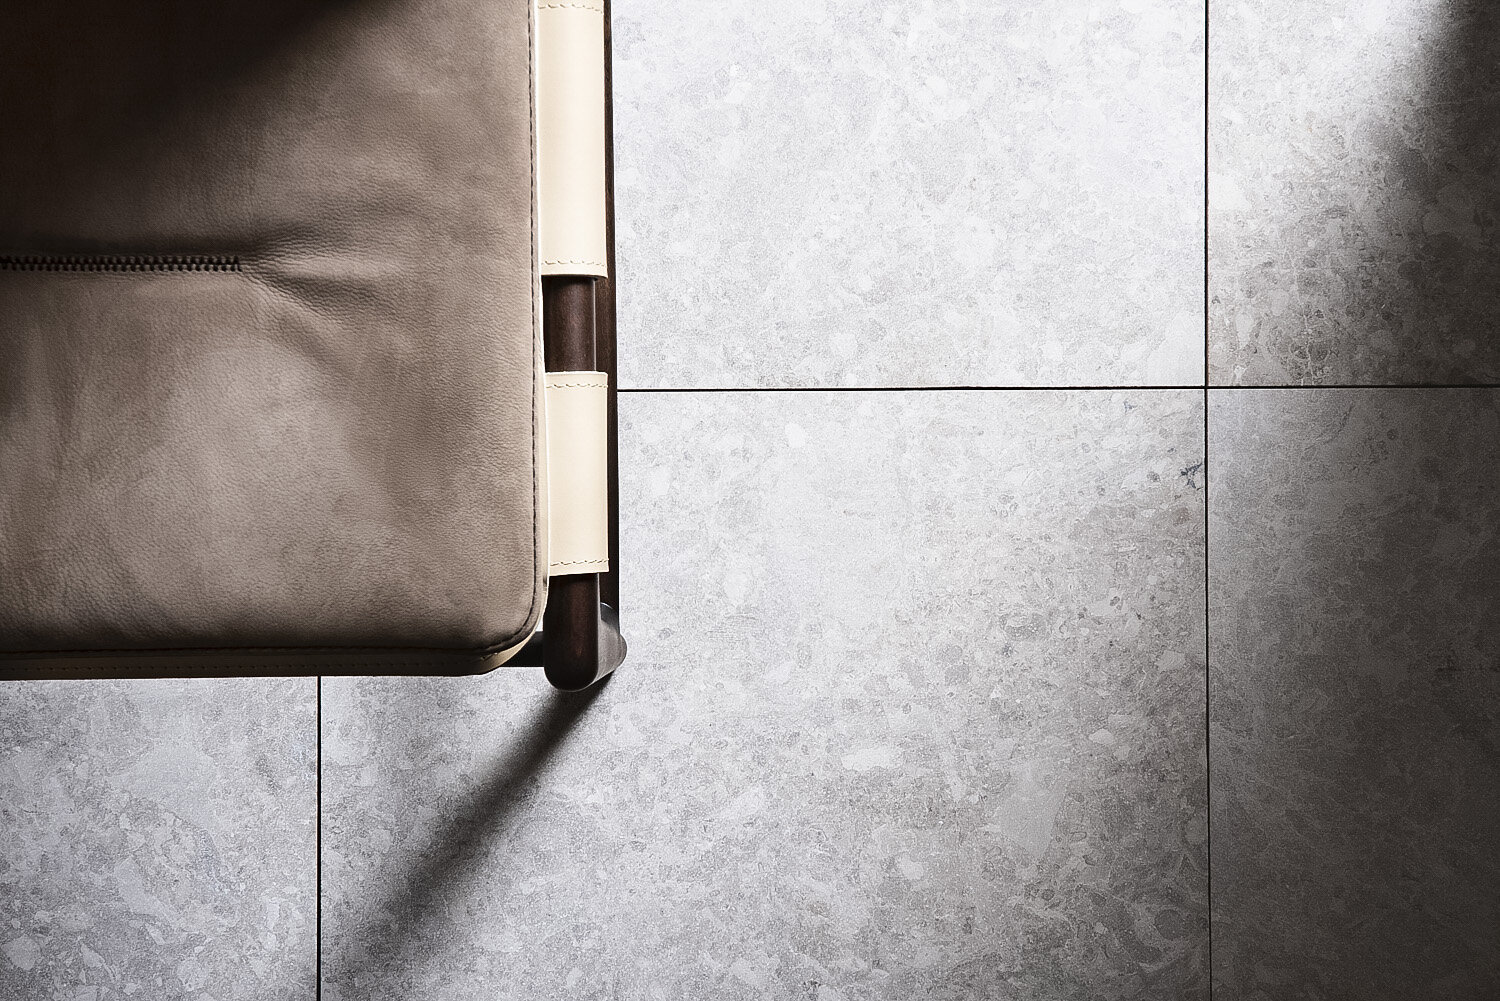 IVDM Photography_European Ceramics luxury chair and stone with moody shadow.jpg